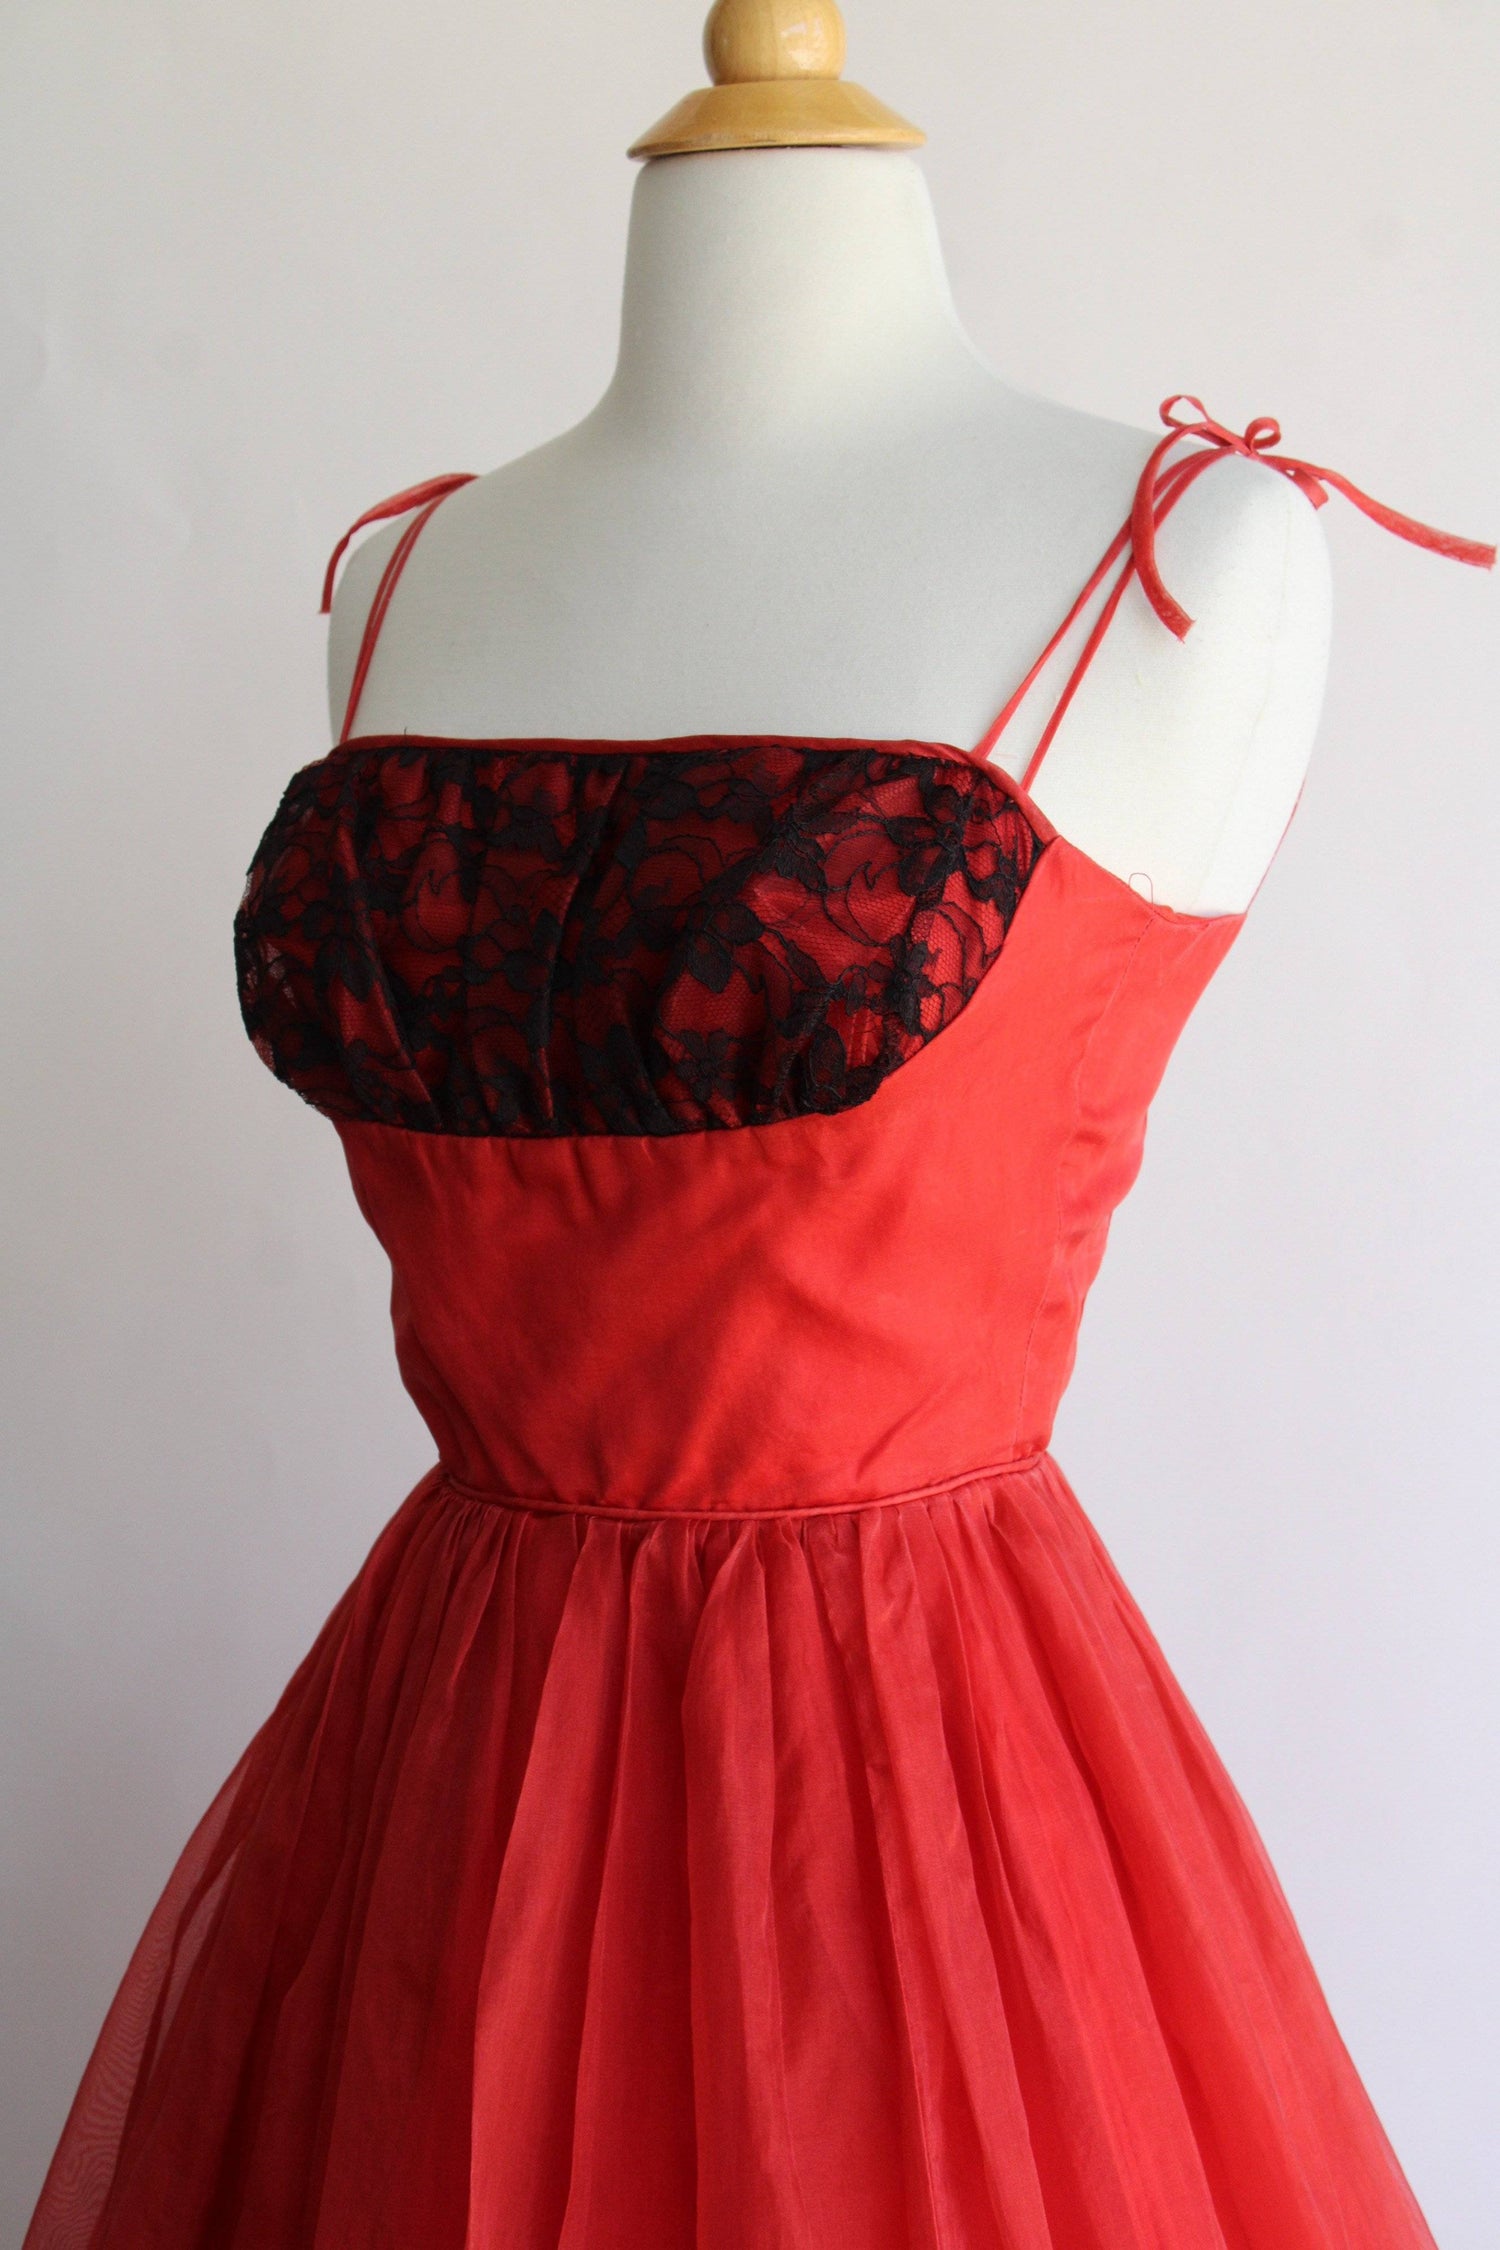 Vintage 1950s Full Skirt Party Dress Red with Black Lace Dress